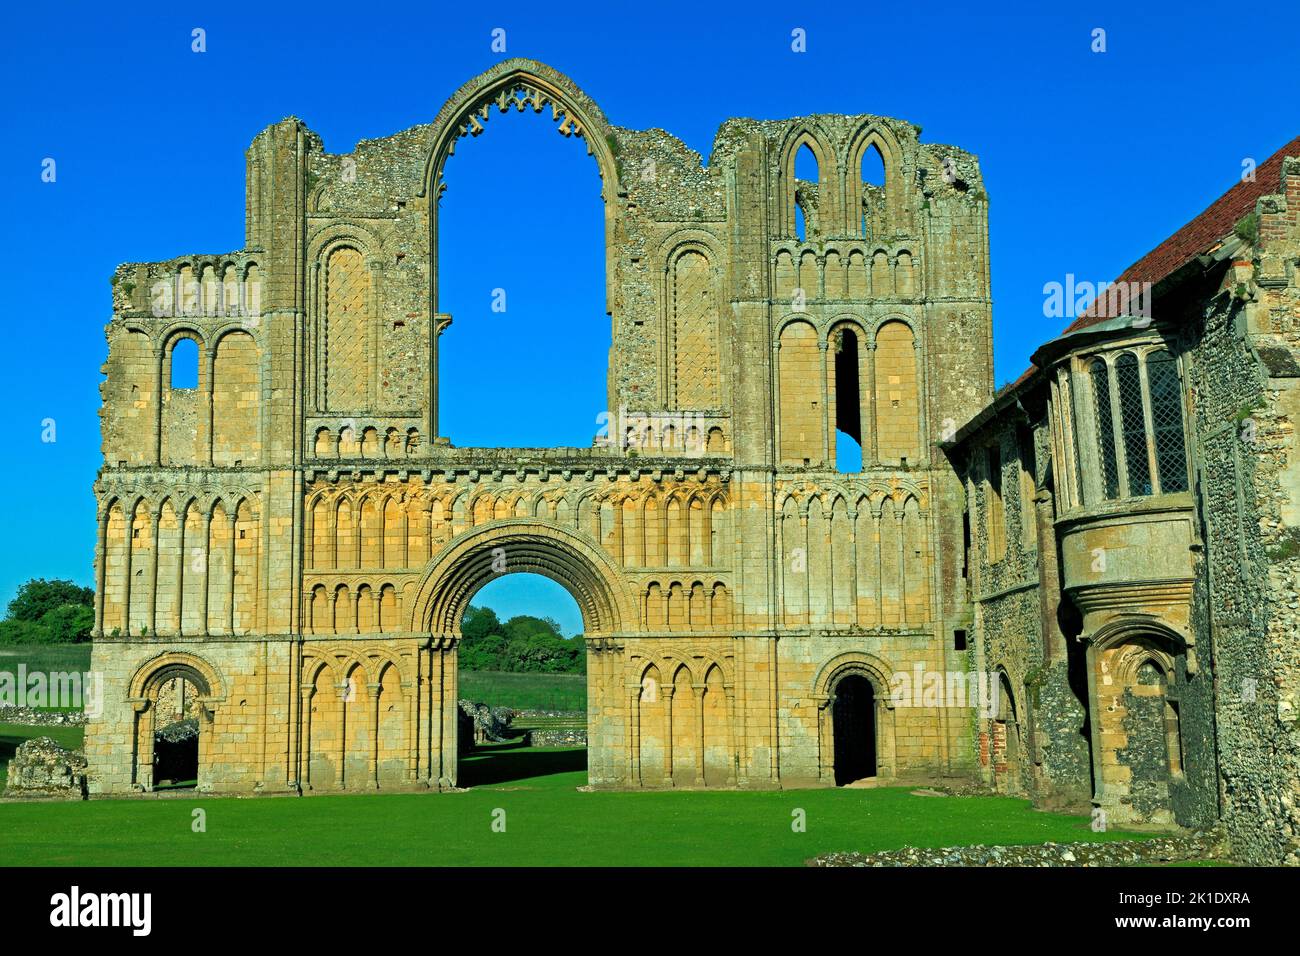 Castle Acre Priory, Norfolk, west front of priory church,  Priors Lodging, English ruined priories, England, UK Stock Photo